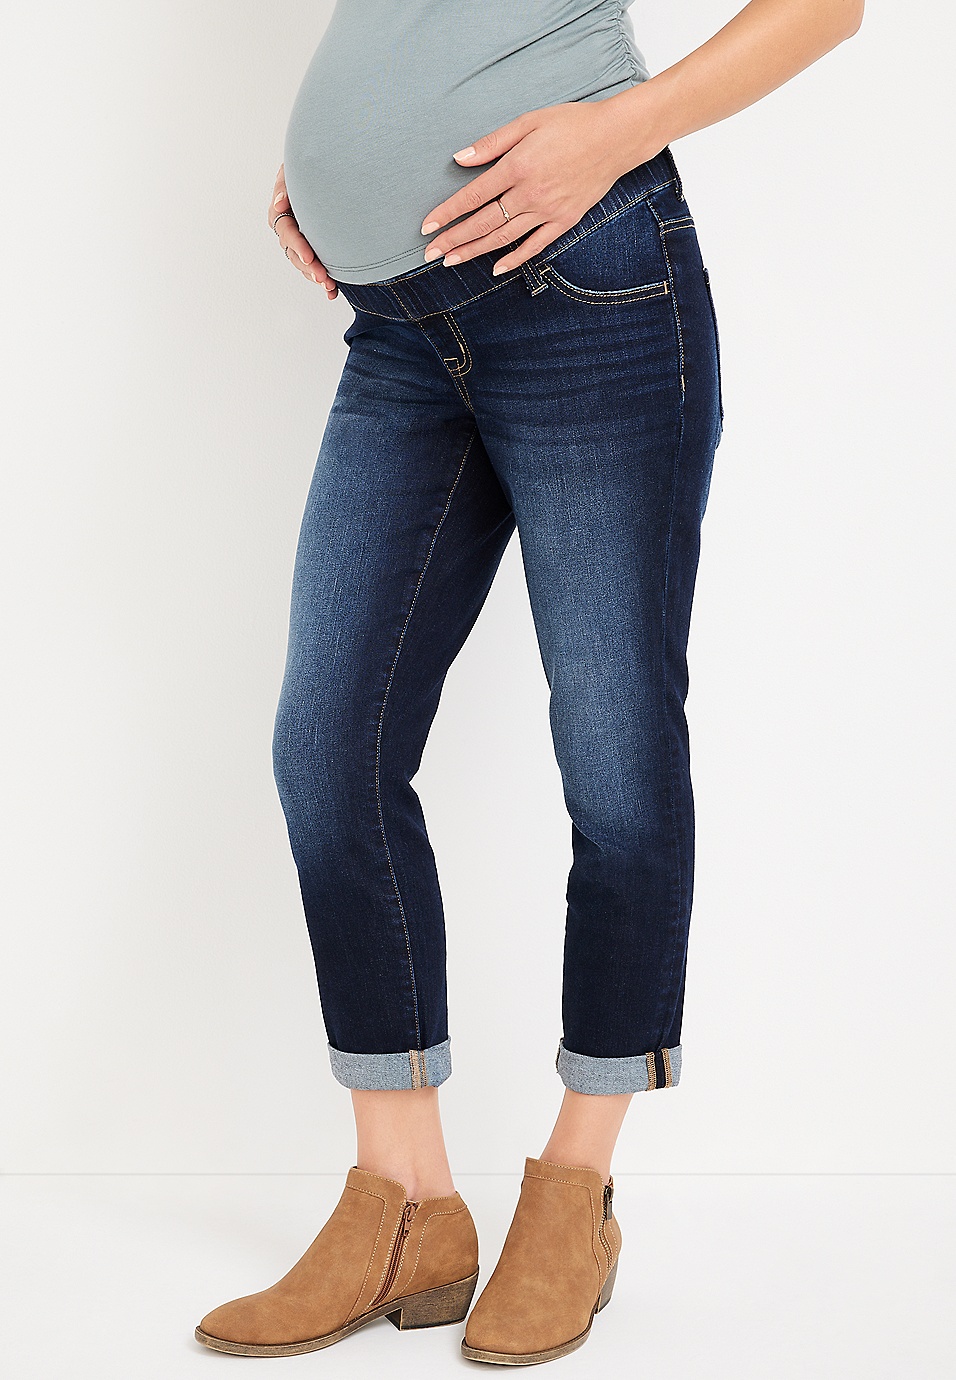 m jeans by maurices™ Cropped Over The Bump Maternity Jean